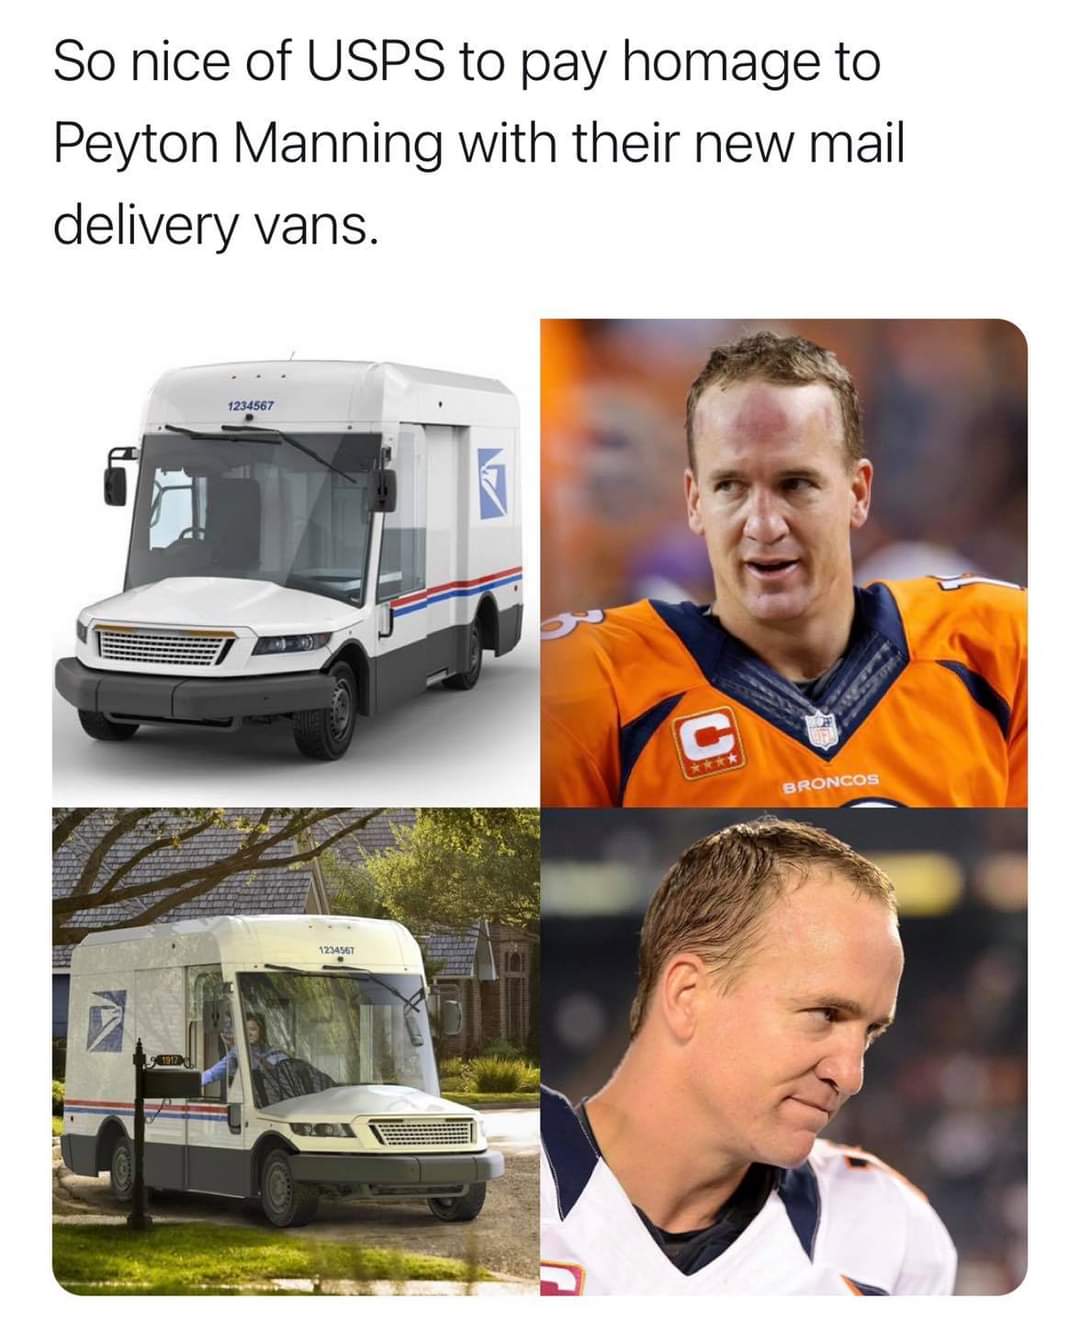 car - So nice of Usps to pay homage to Peyton Manning with their new mail delivery vans. 1234567 Ext. Broncos 1234567 1912